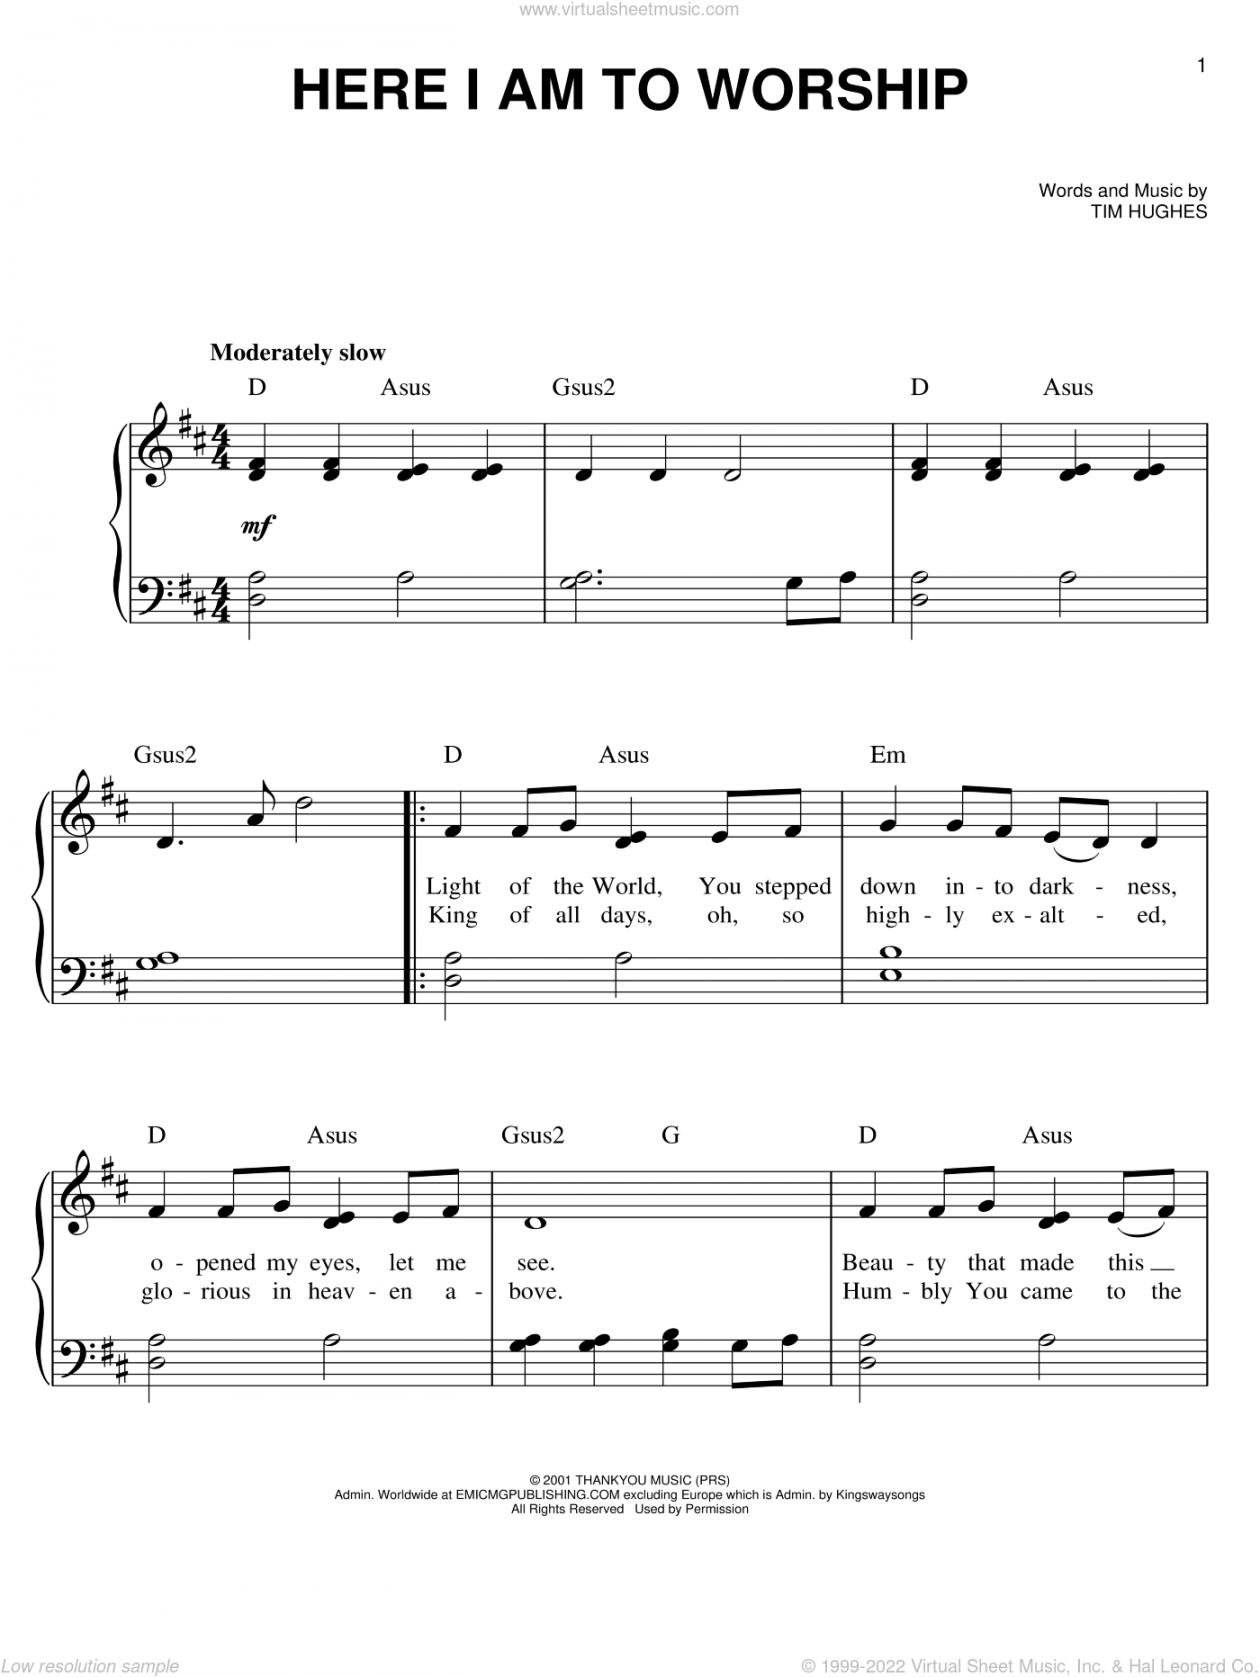 Free Printable Sheet Music With Lyrics - Printable - Here I Am To Worship sheet music (easy version ) for piano solo